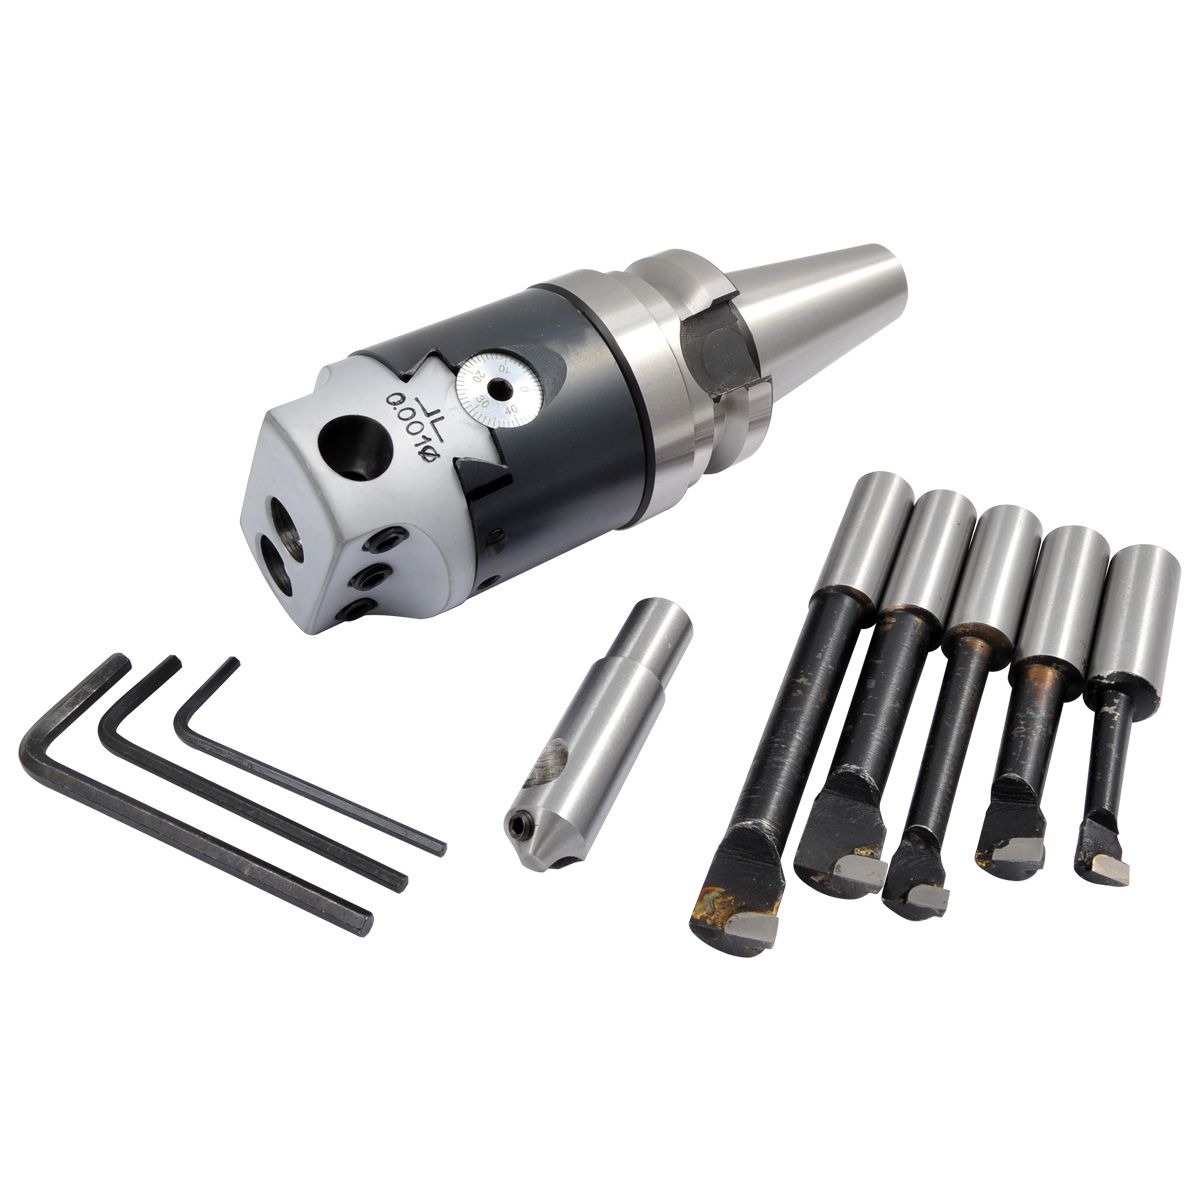 2" BORING HEAD KIT WITH BT30 SHANK, BORING BARS & FLY CUTTER (1061-0106)